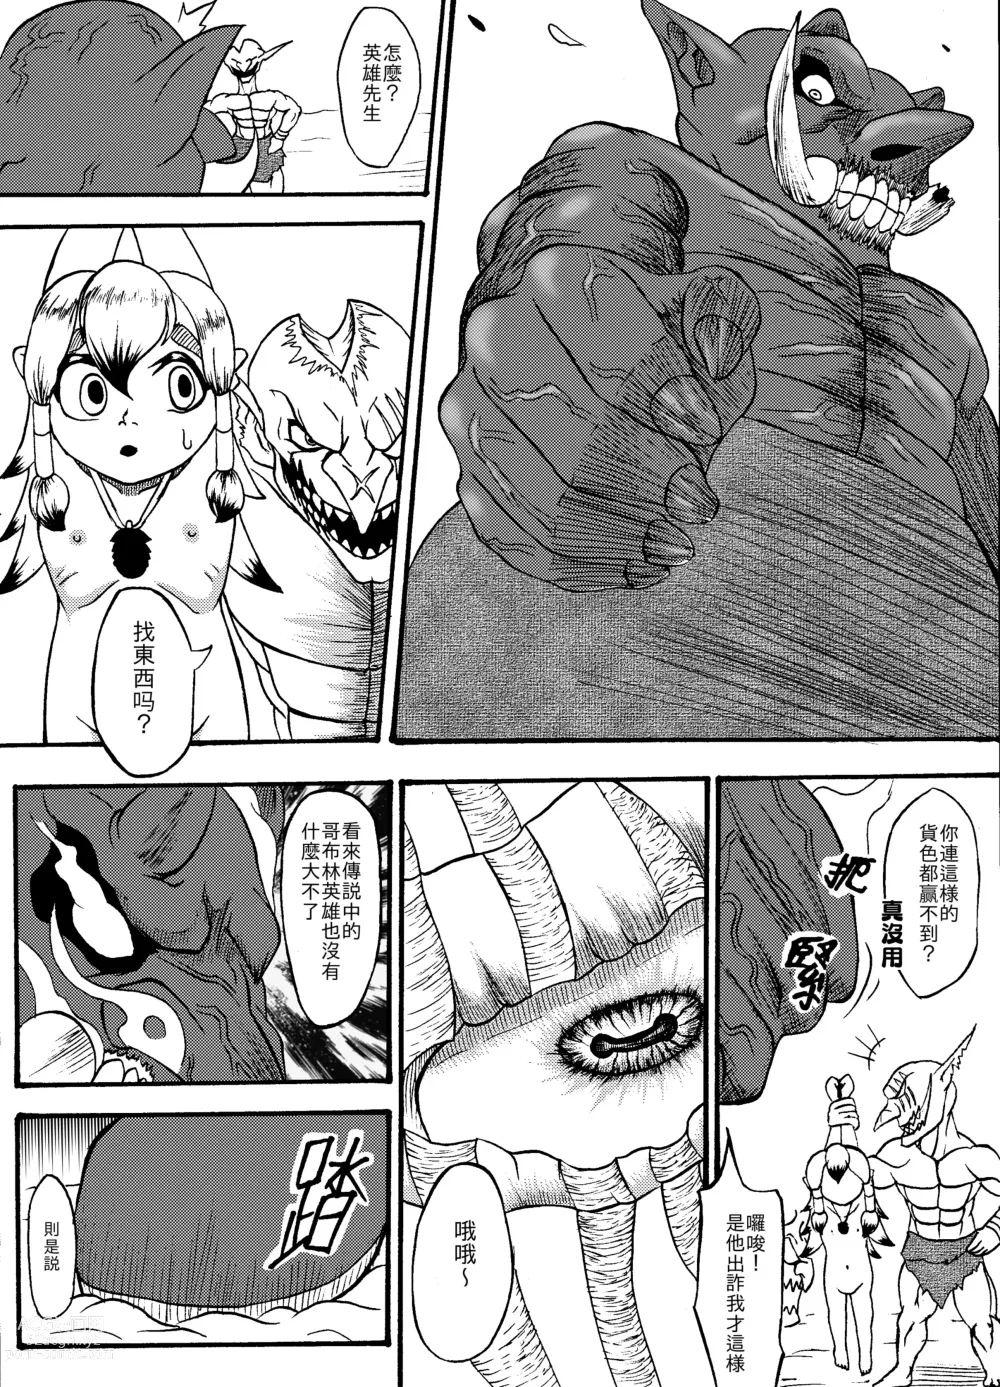 Page 29 of manga 哥布林傳奇8 Goblin Legend Chapter